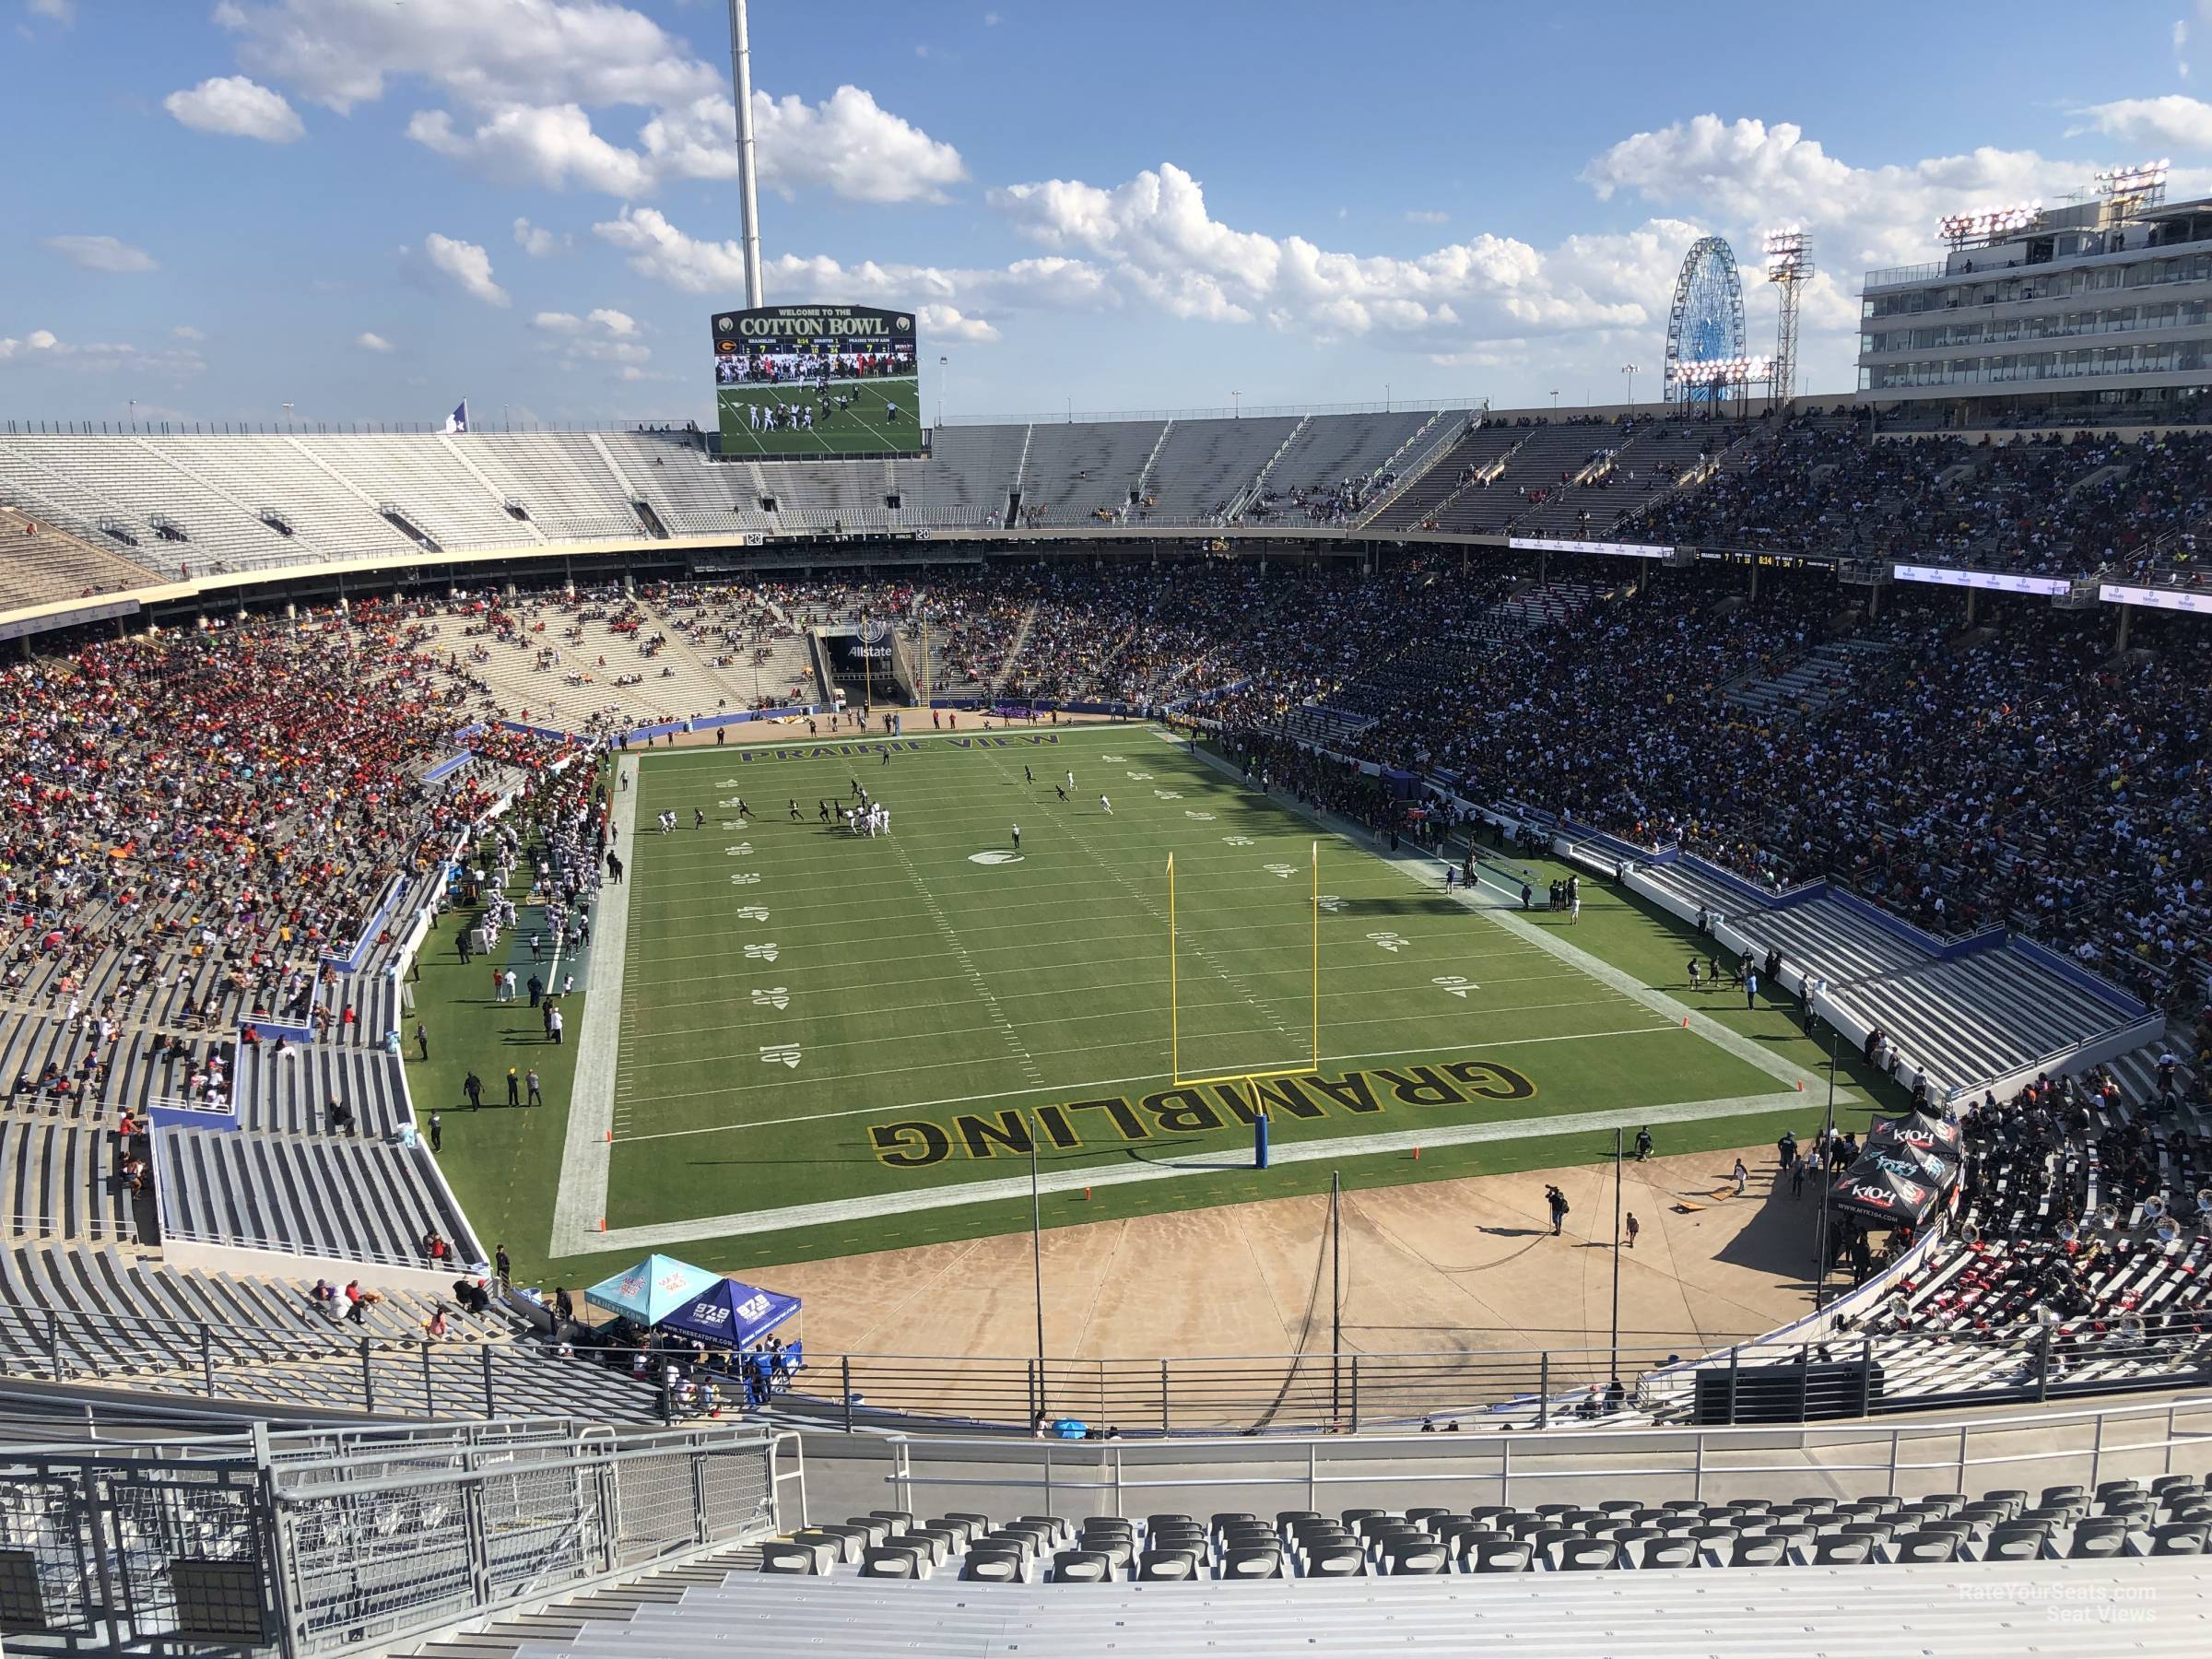 section 118, row 22 seat view  - cotton bowl